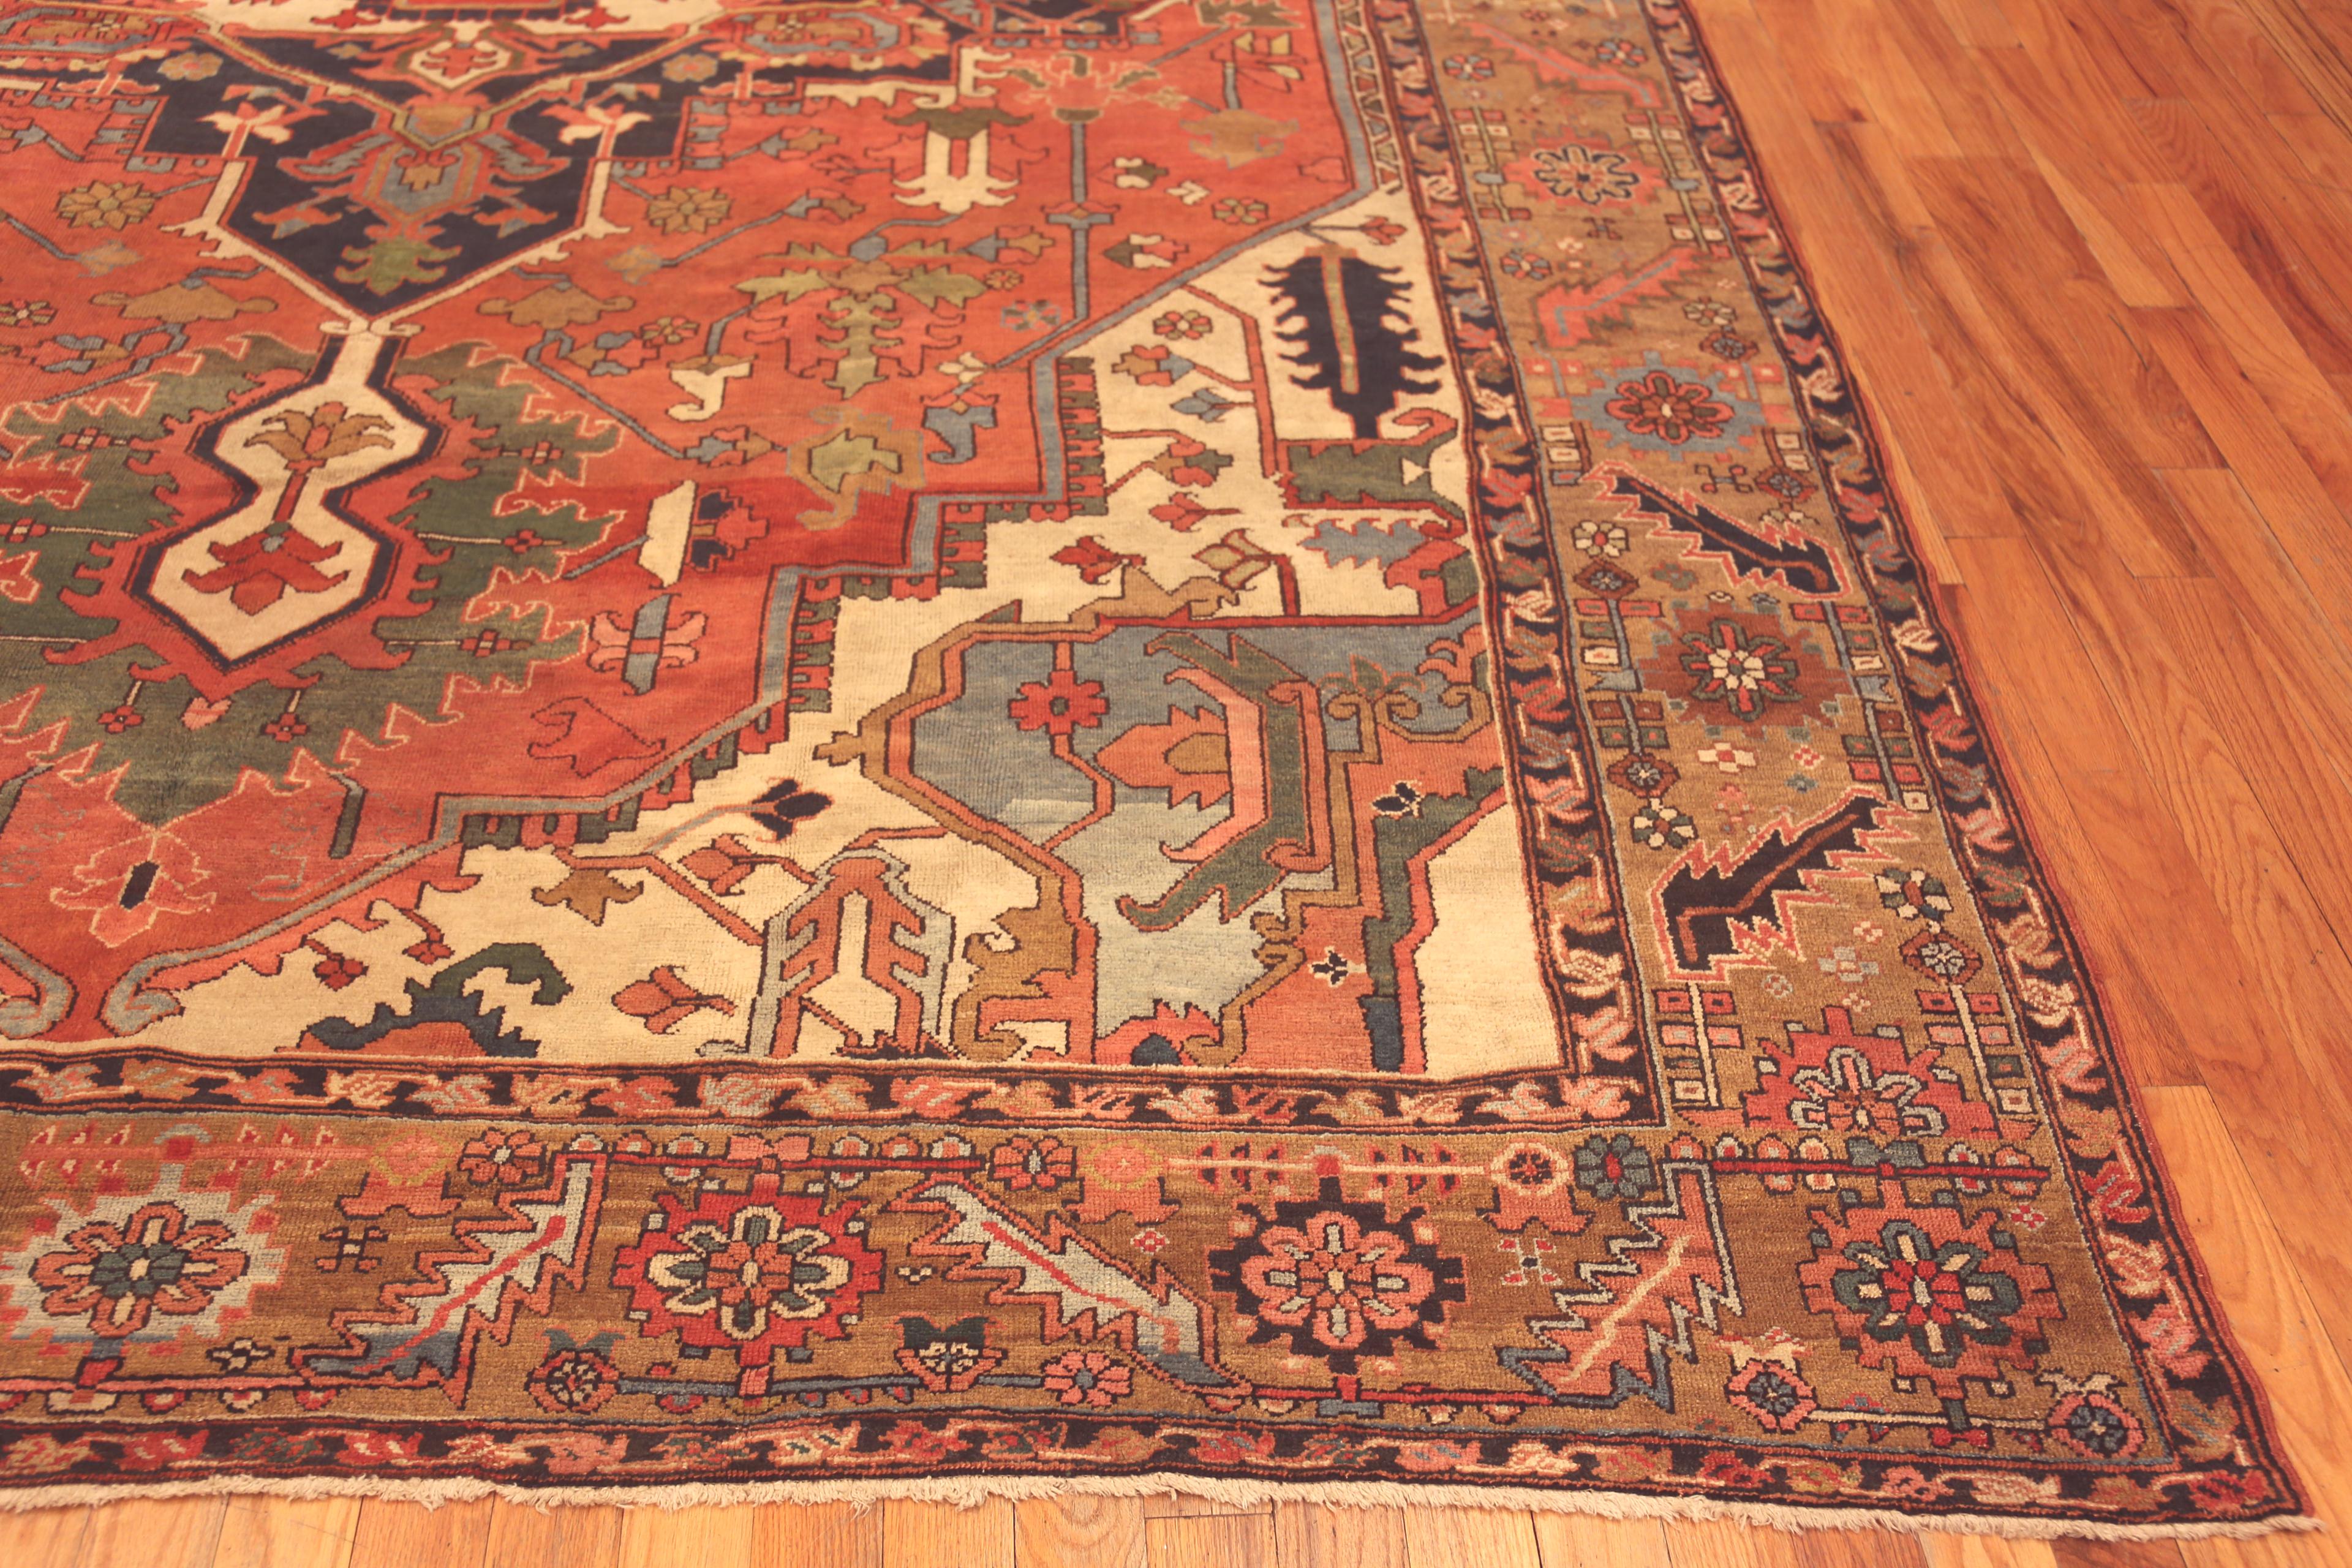 Hand-Knotted Rustic Room Size Elegant Antique Persian Heriz Area Rug 10'5